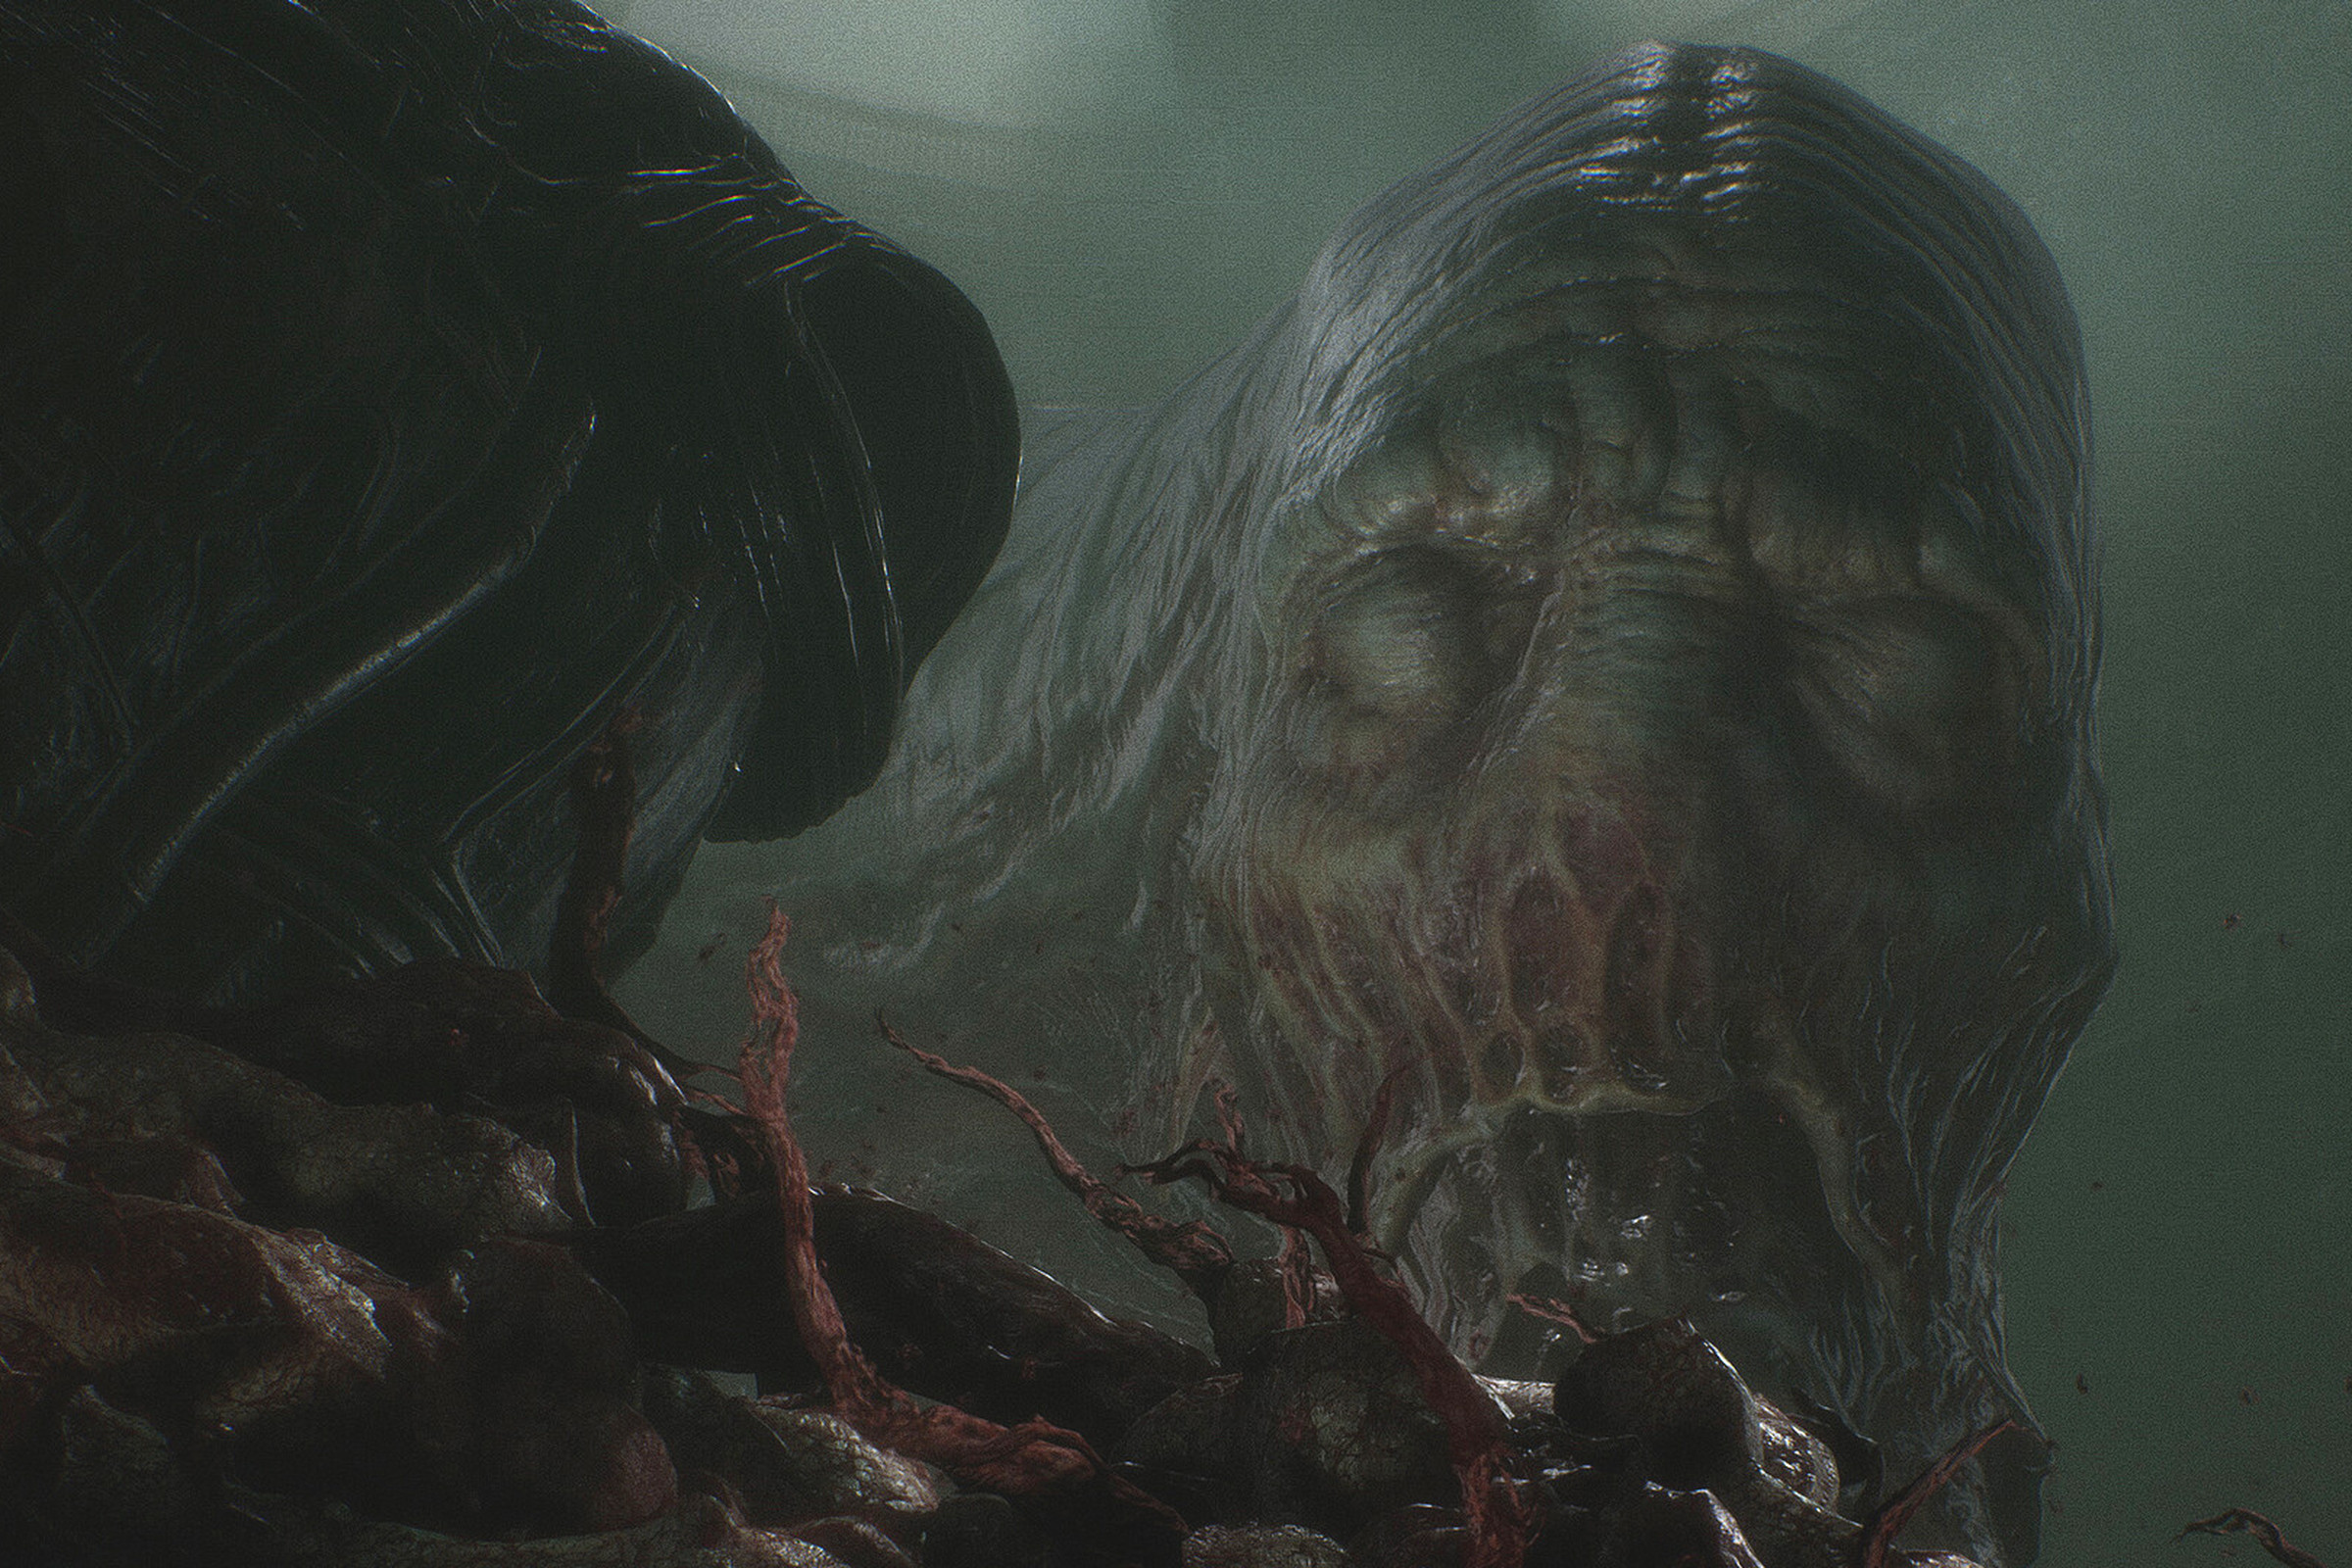 Screenshot from Scorn featuring a large fleshy head with skin covering the eye sockets with red-tinged and wrinkled lips.